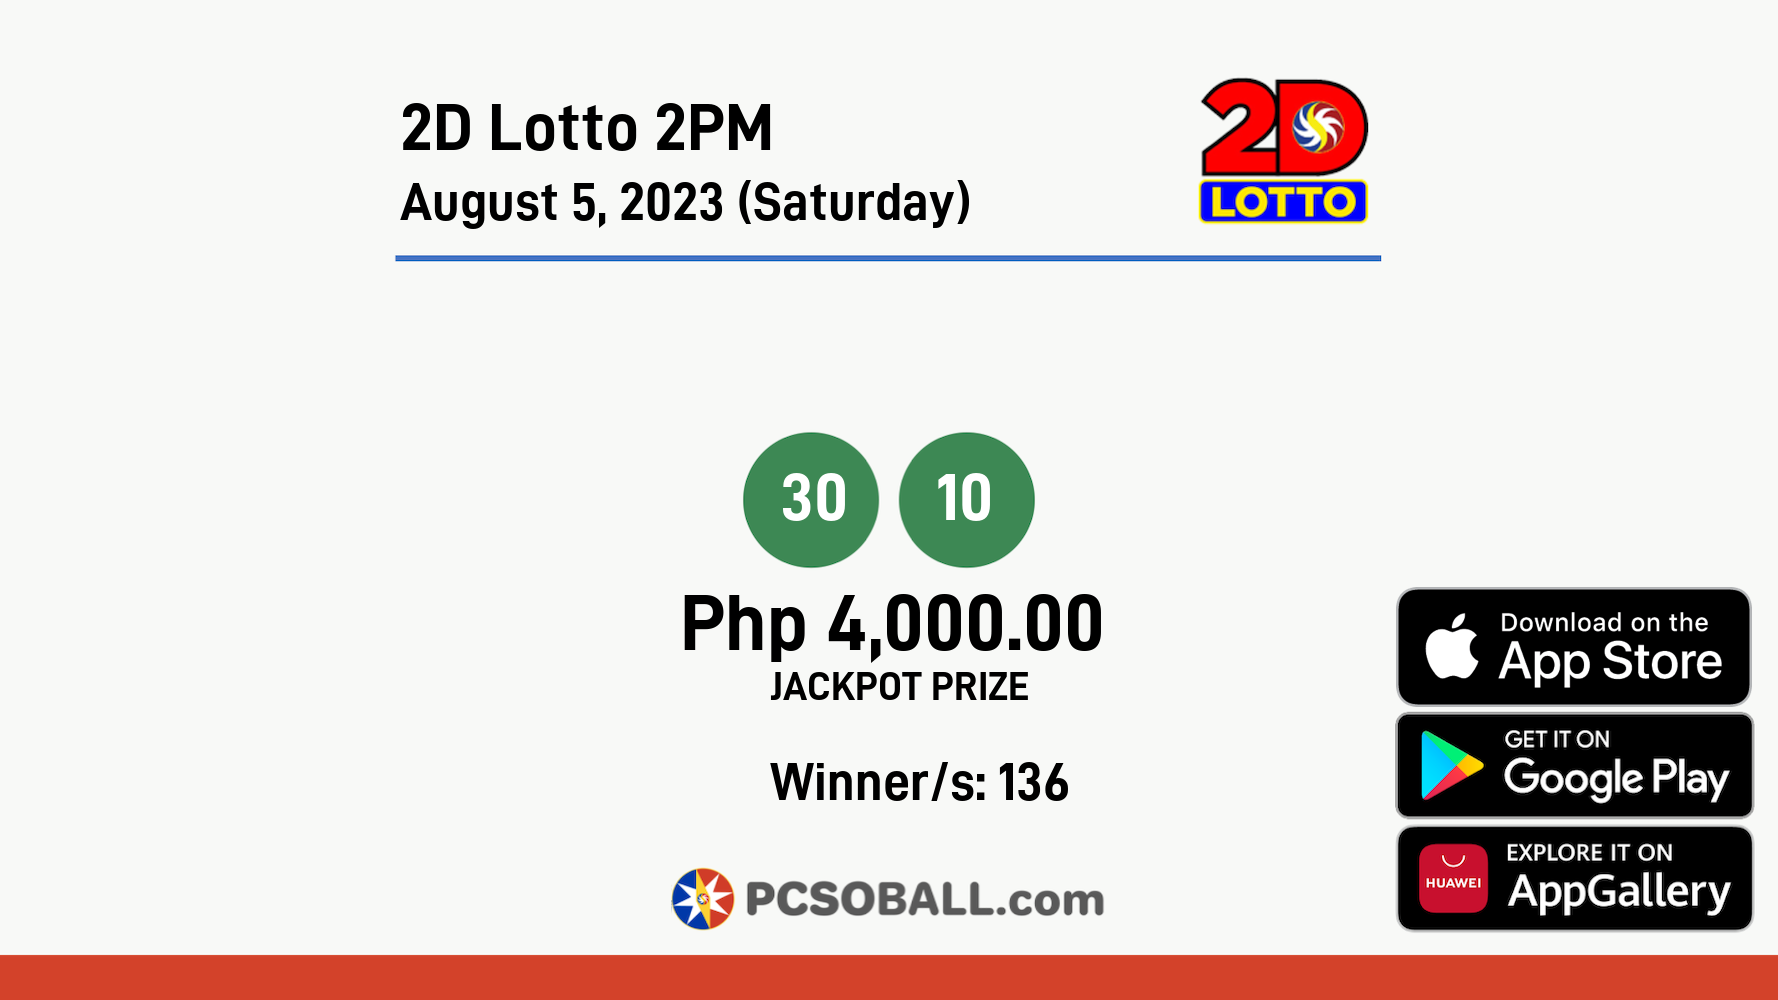 2D Lotto 2PM August 5, 2023 (Saturday) Result